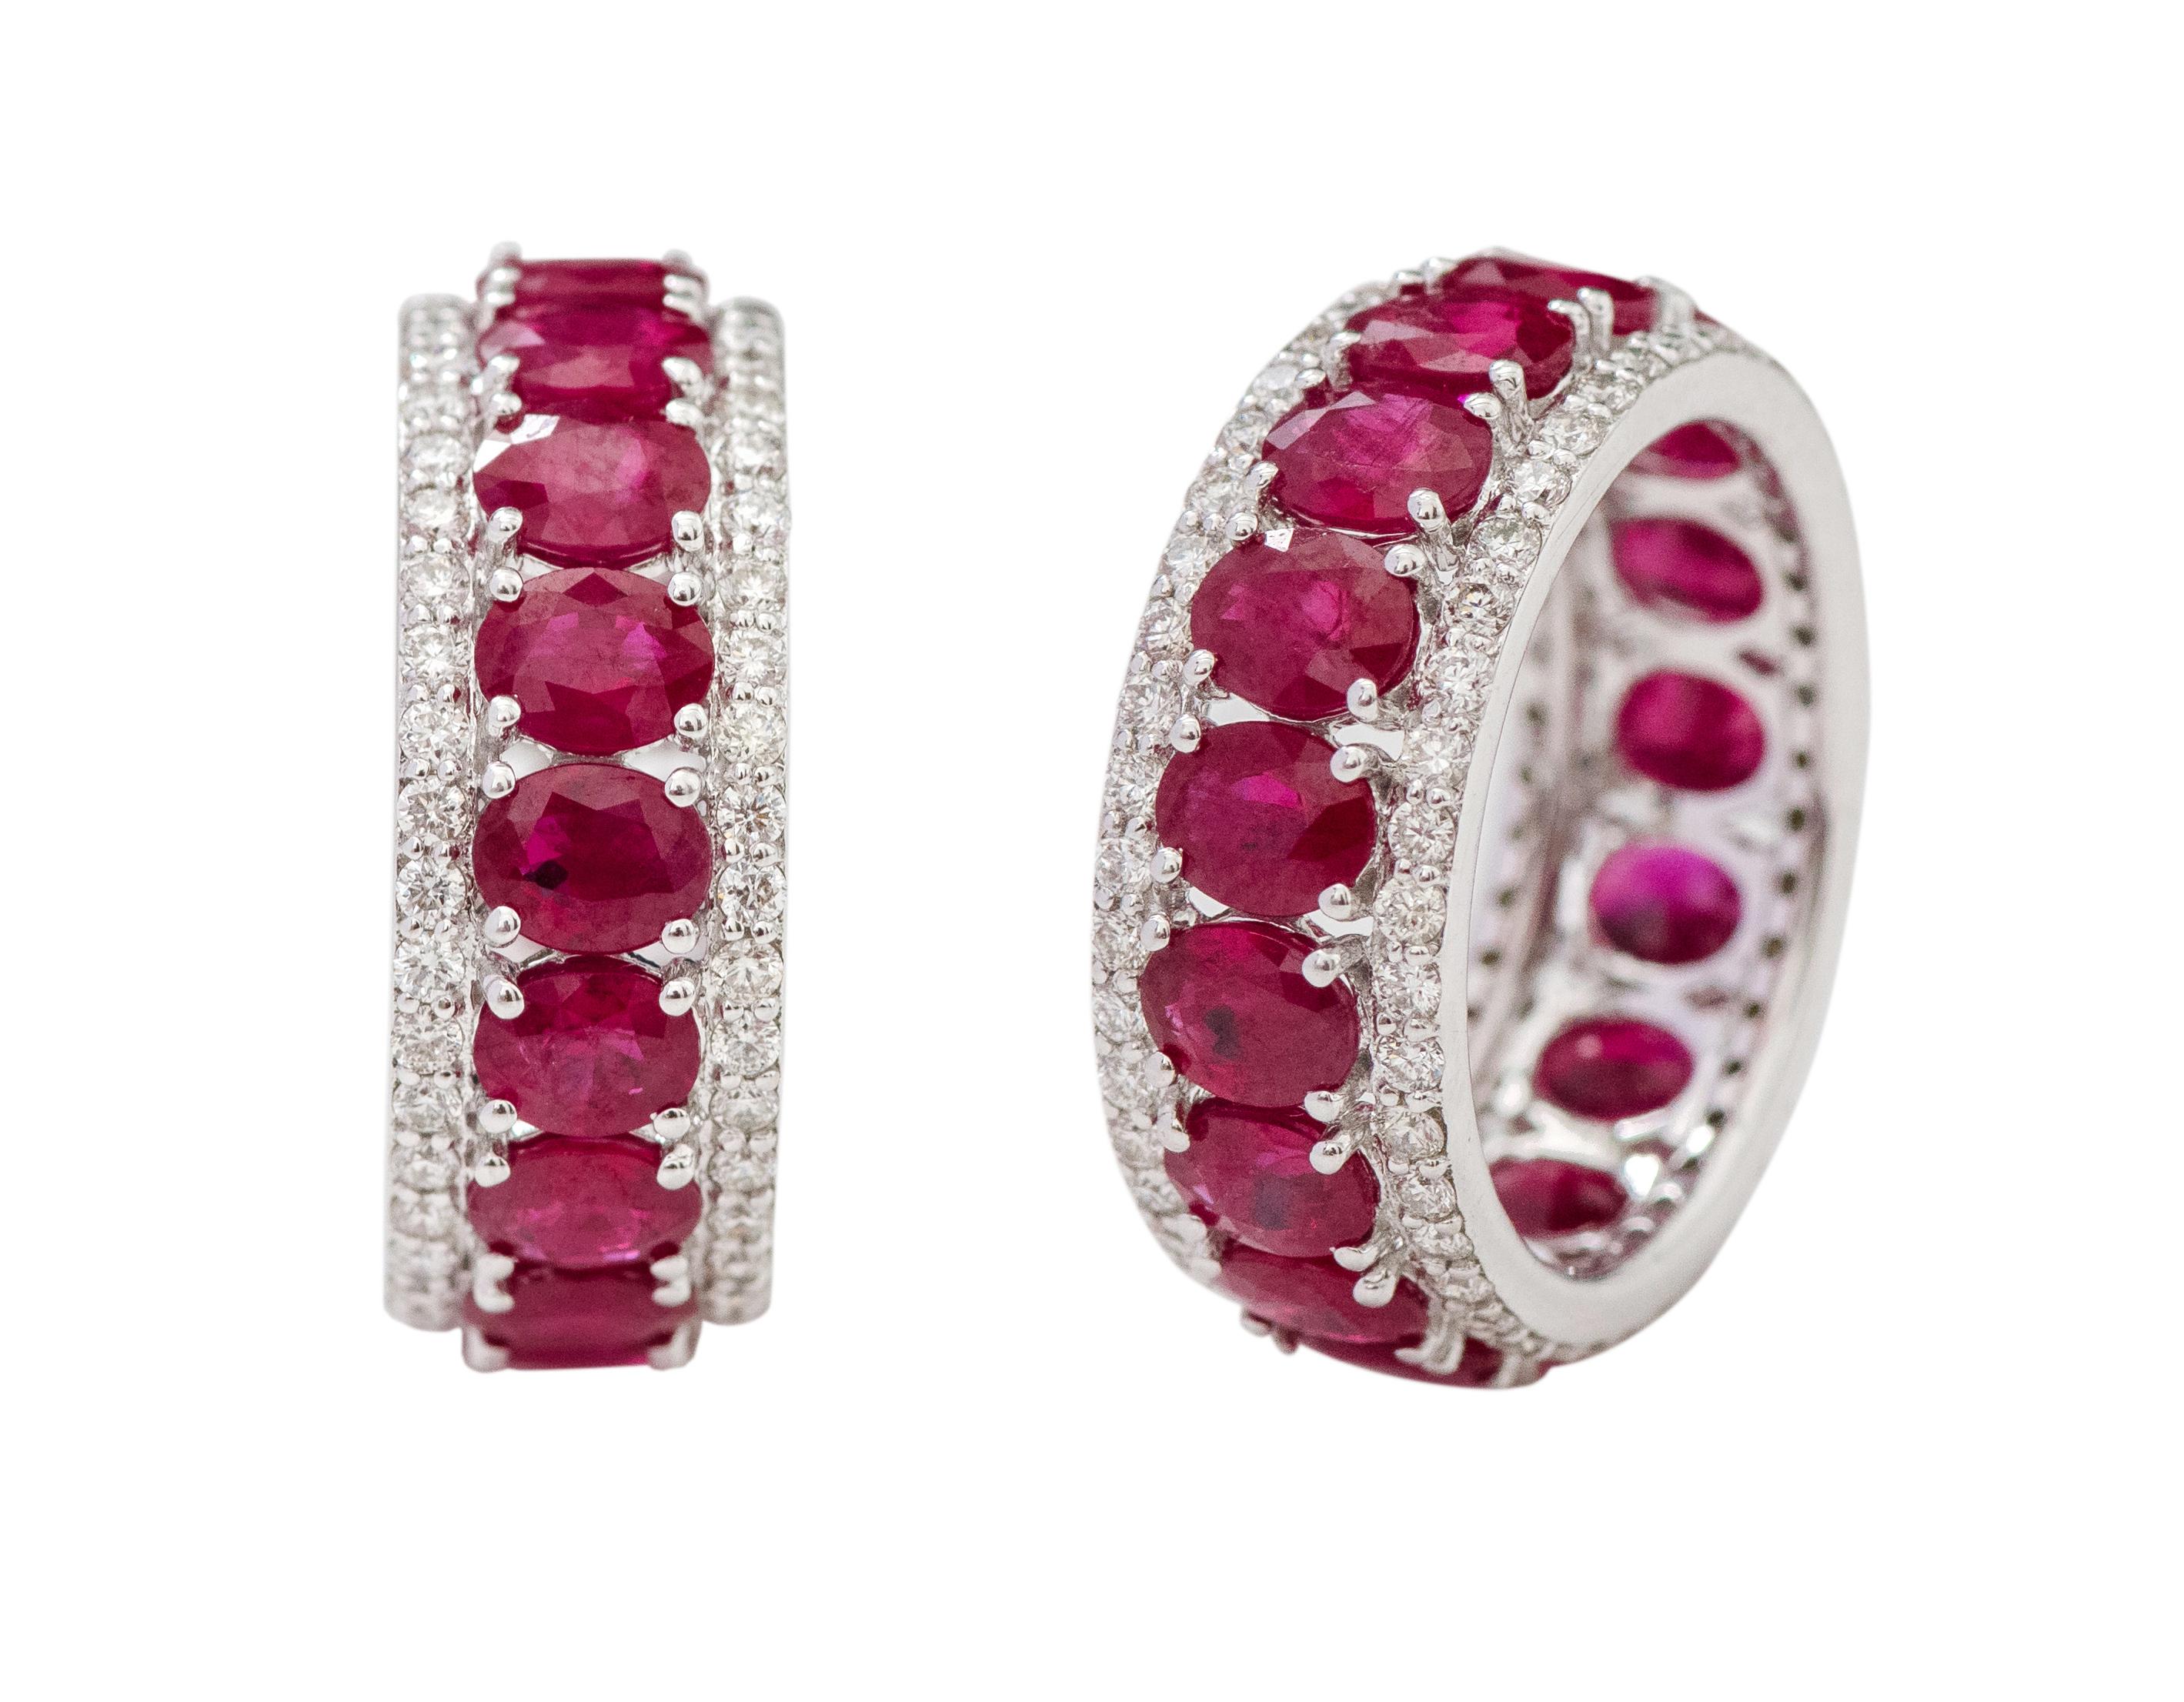 Contemporary 18 Karat White Gold 7.02 Carat Oval-Cut Ruby and Diamond Eternity Band Ring For Sale